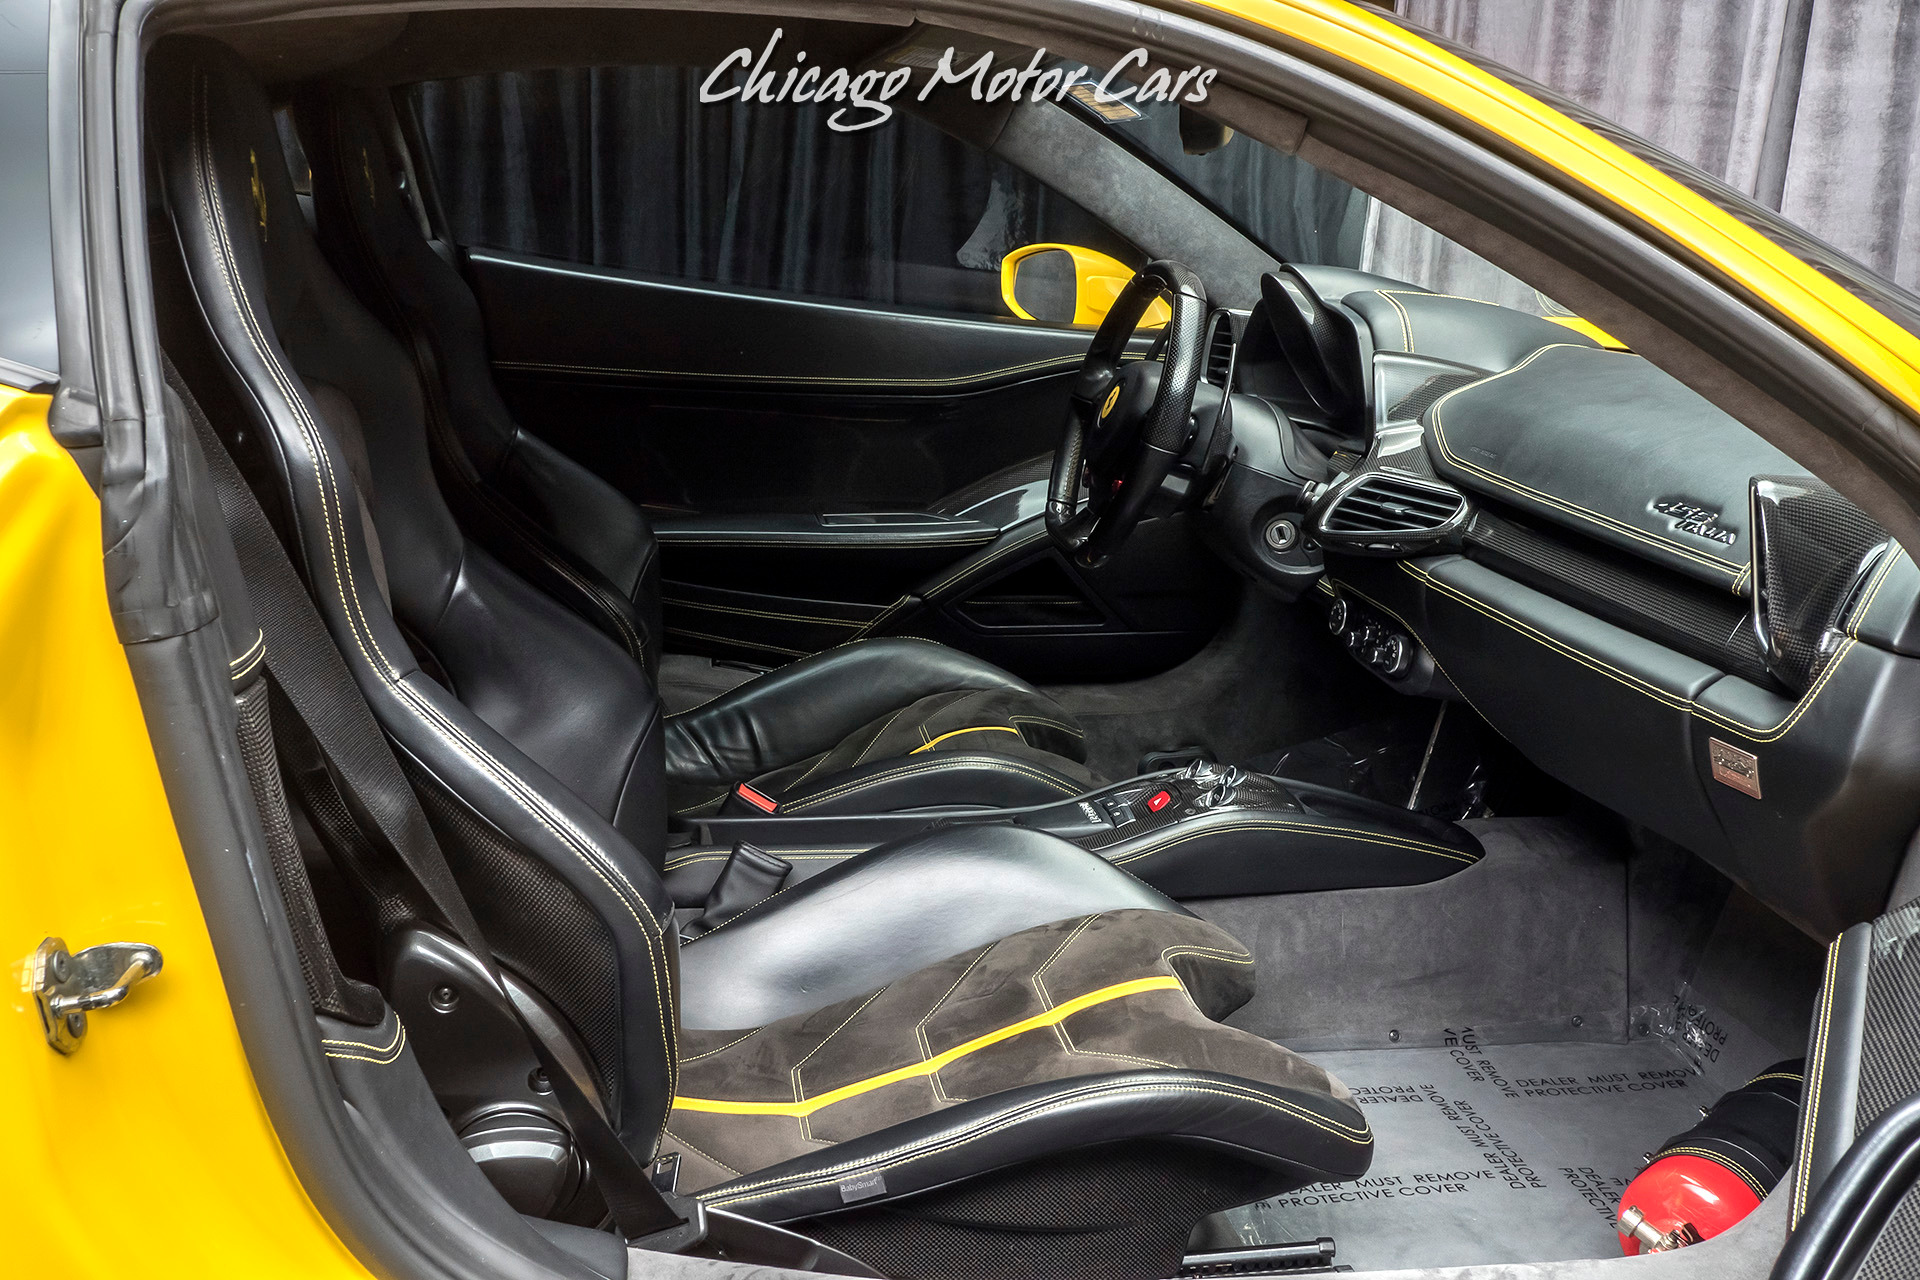 Used-2010-Ferrari-458-Italia-Coupe-Carbon-Fiber-Optioned-Extremely-Well